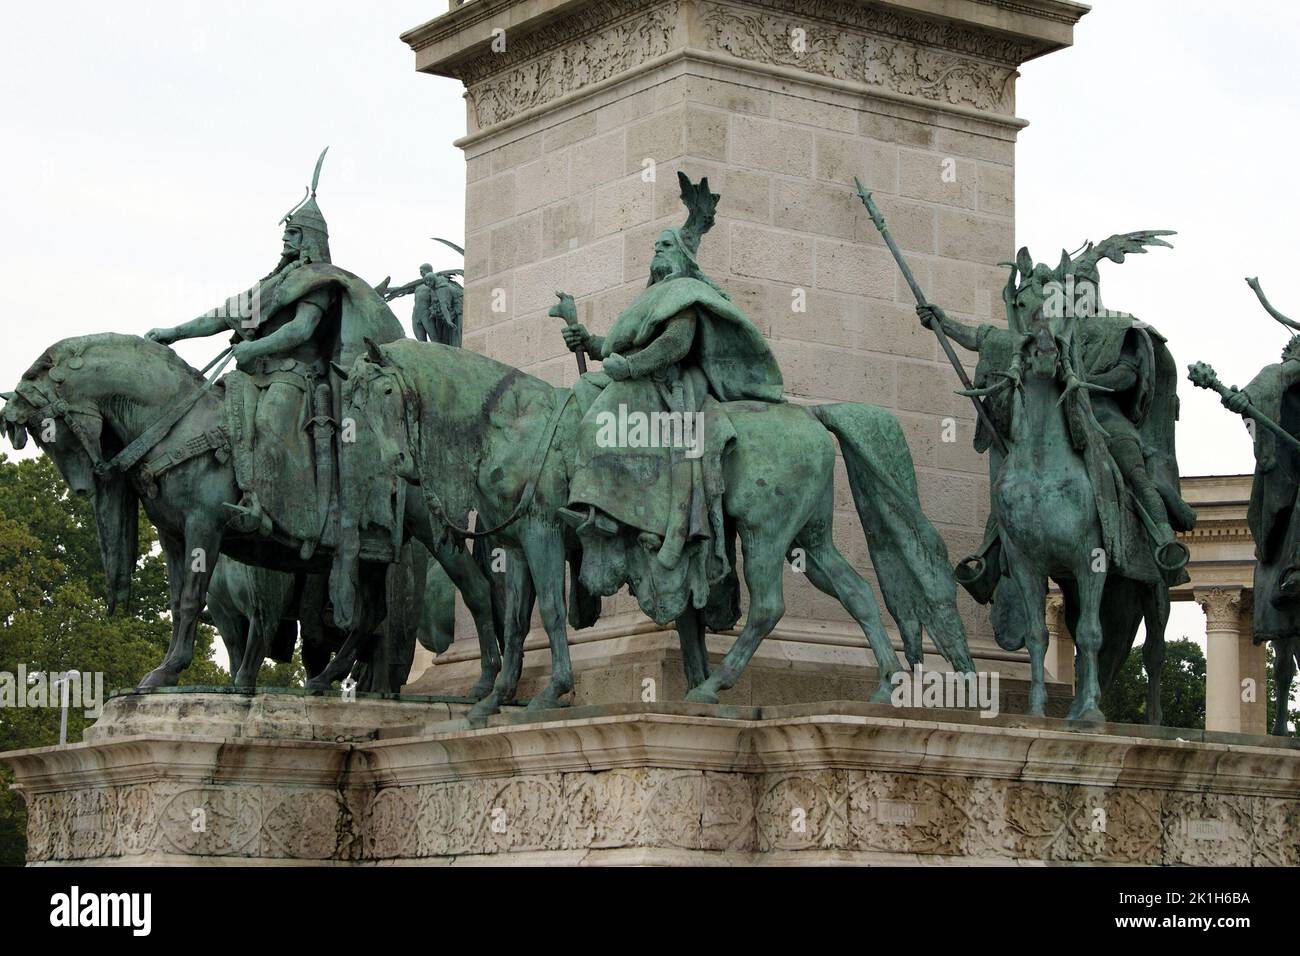 Legendary Chieftains of Hungarians, detail of the sculptural group at the Millennium Monument, Budapest, Hungary Stock Photo